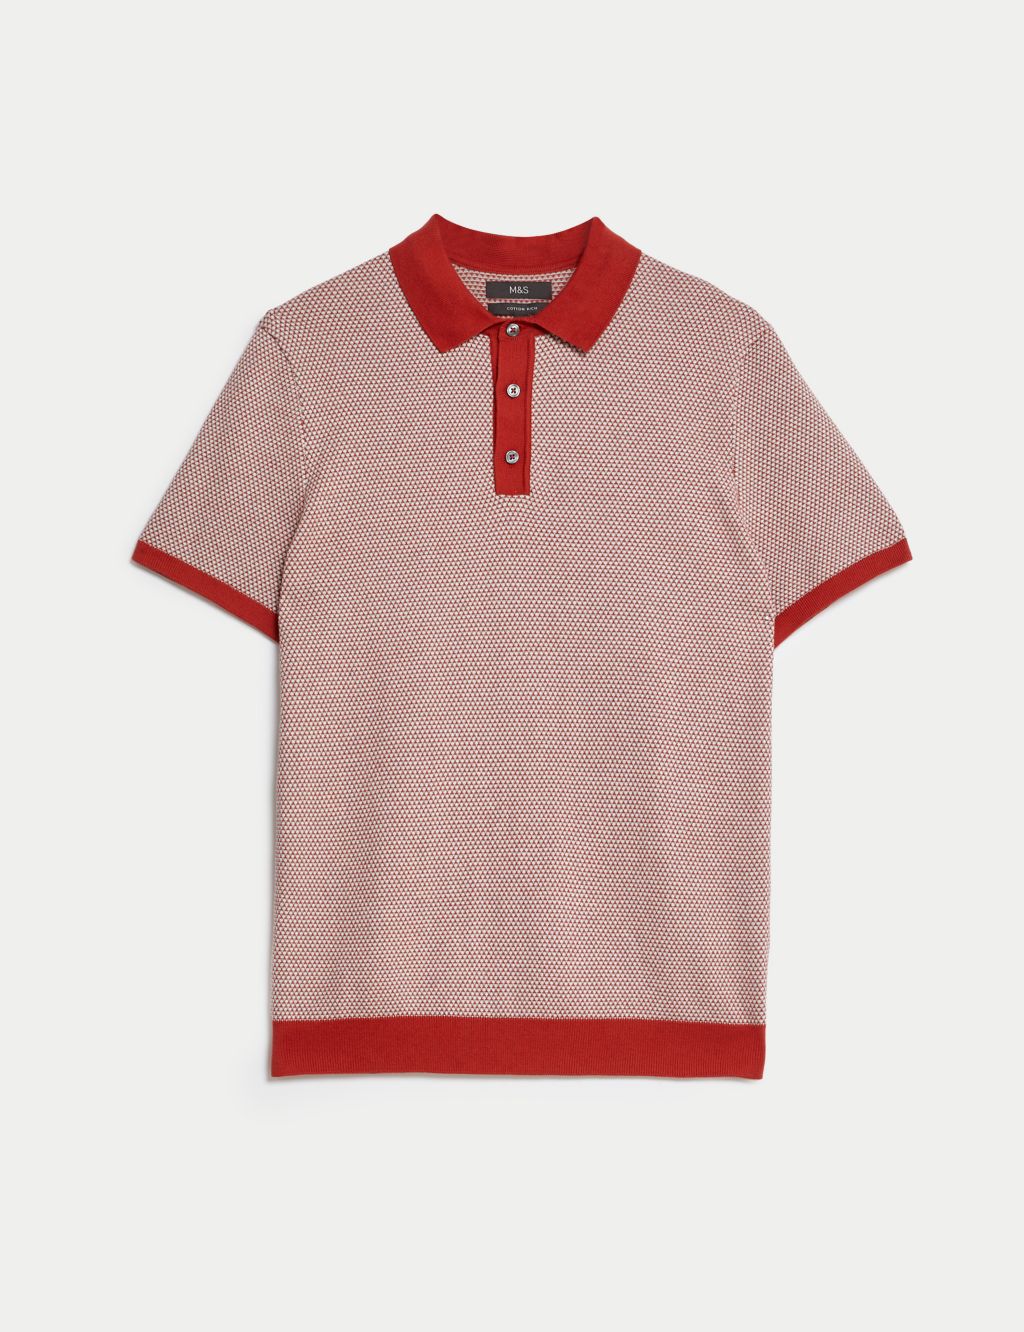 Cotton Rich Short Sleeve Knitted Polo Shirt image 2